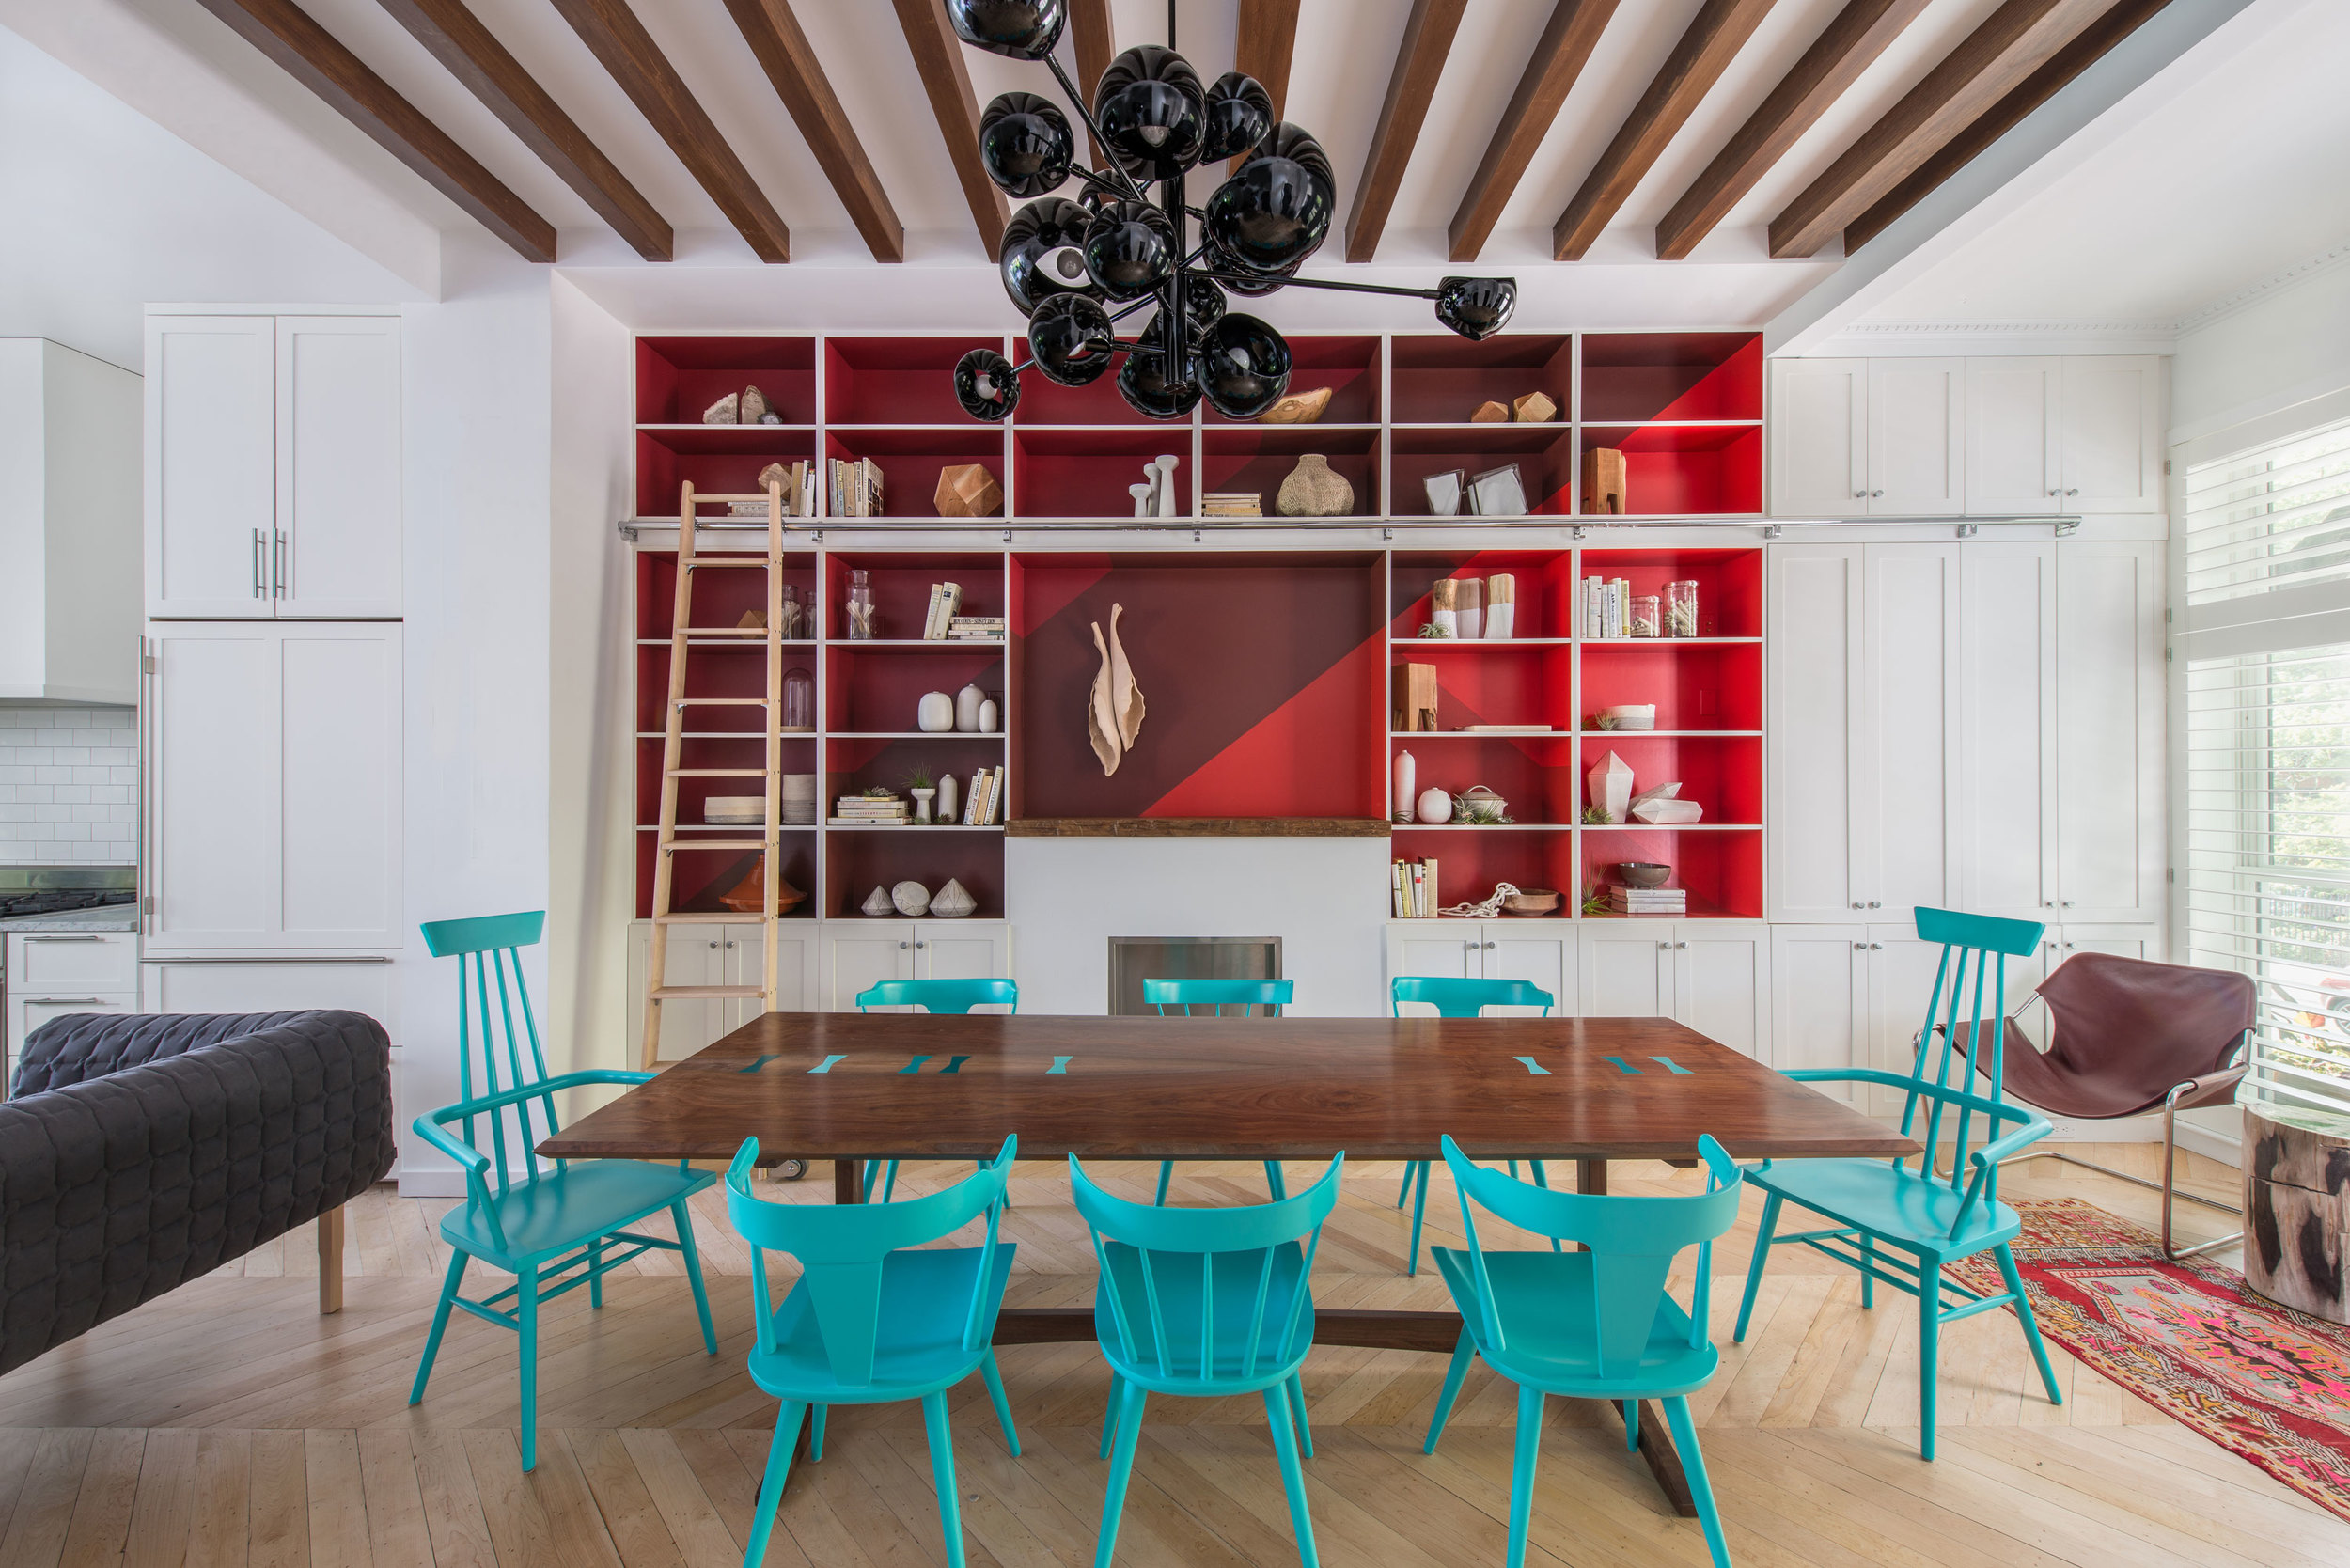 Trend Spotting Color Blocking Ideas for a Cheery Dining Room 1